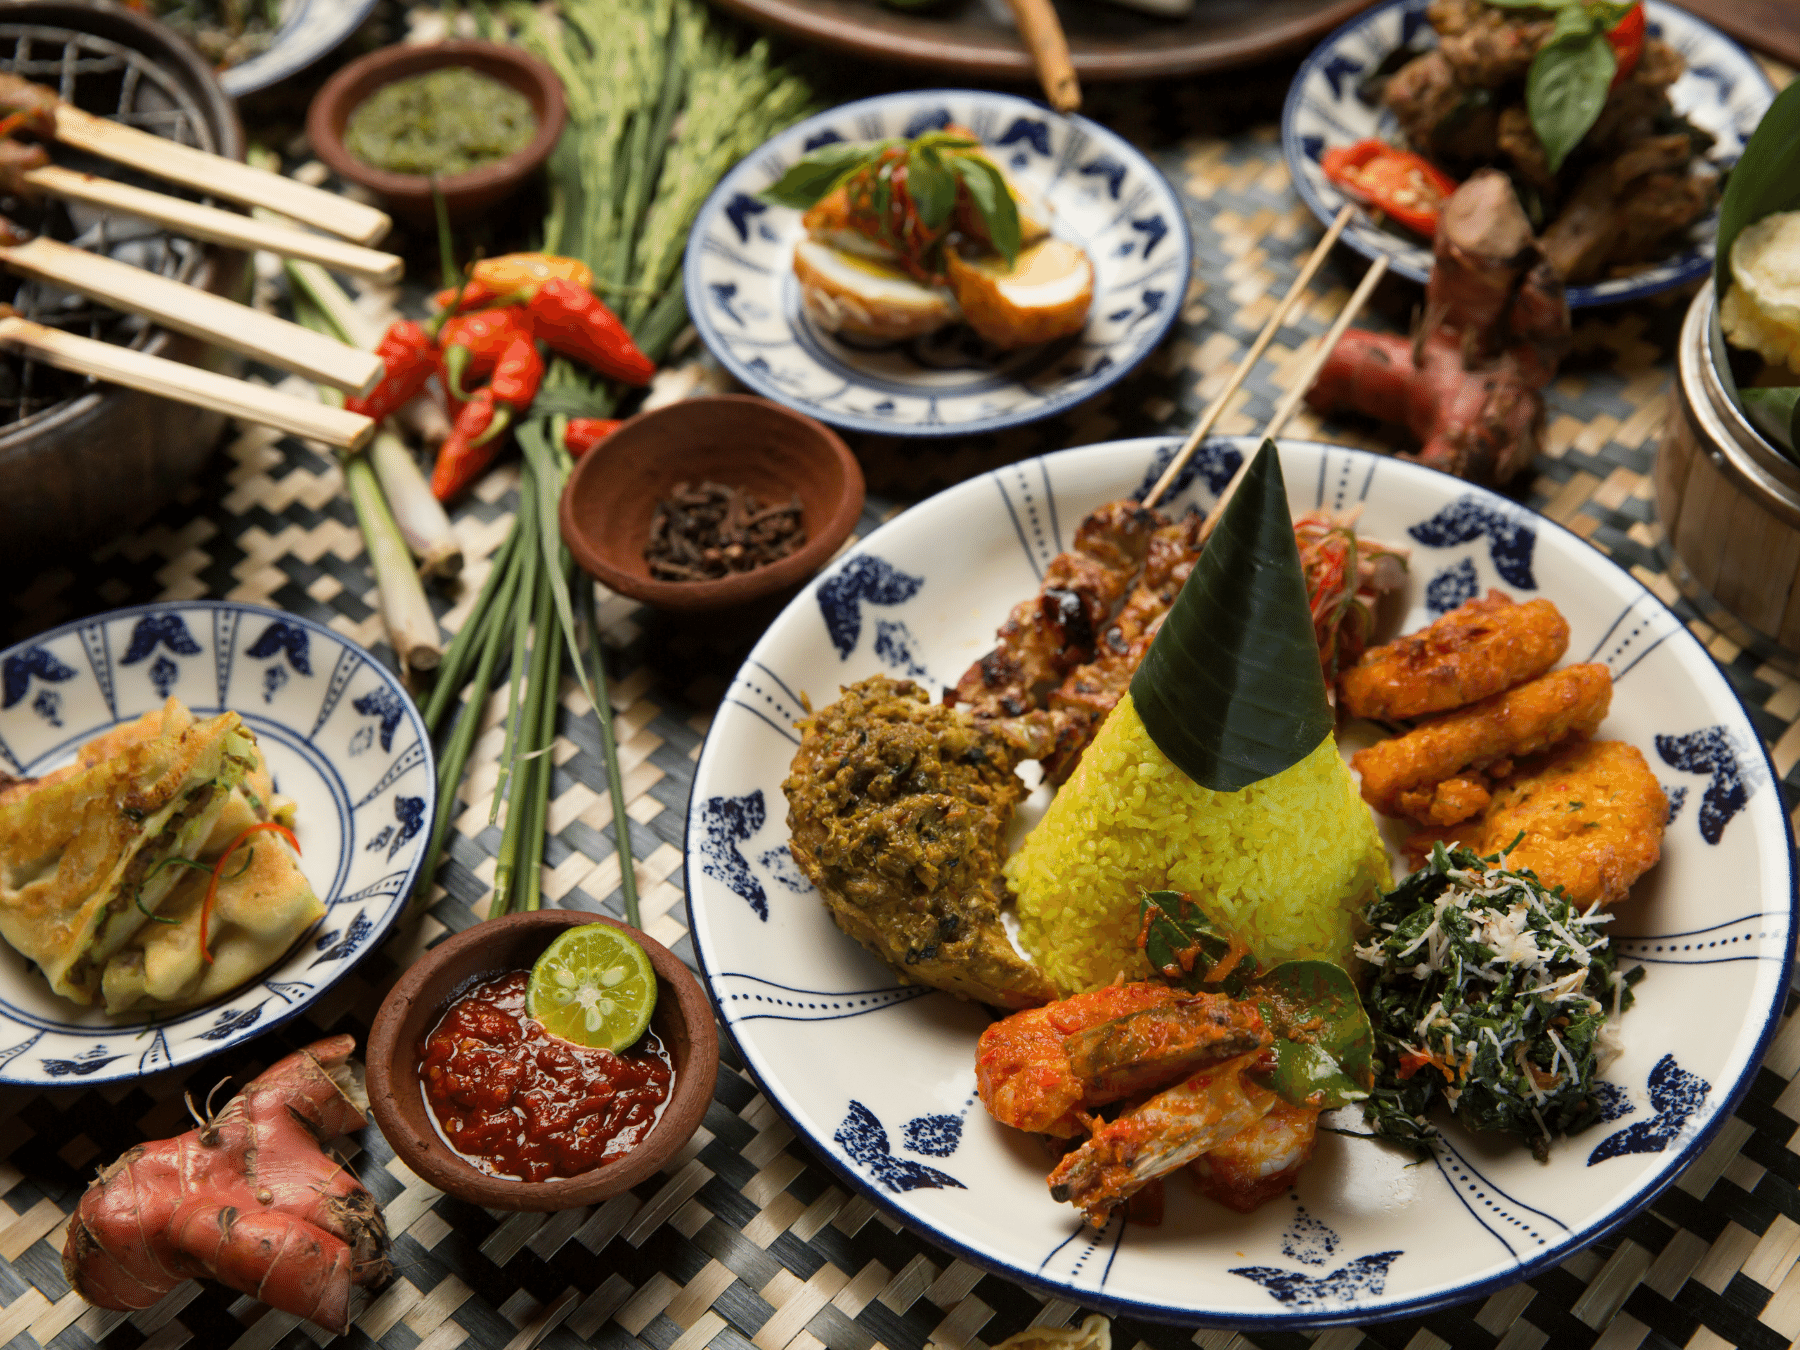 Balinese dishes